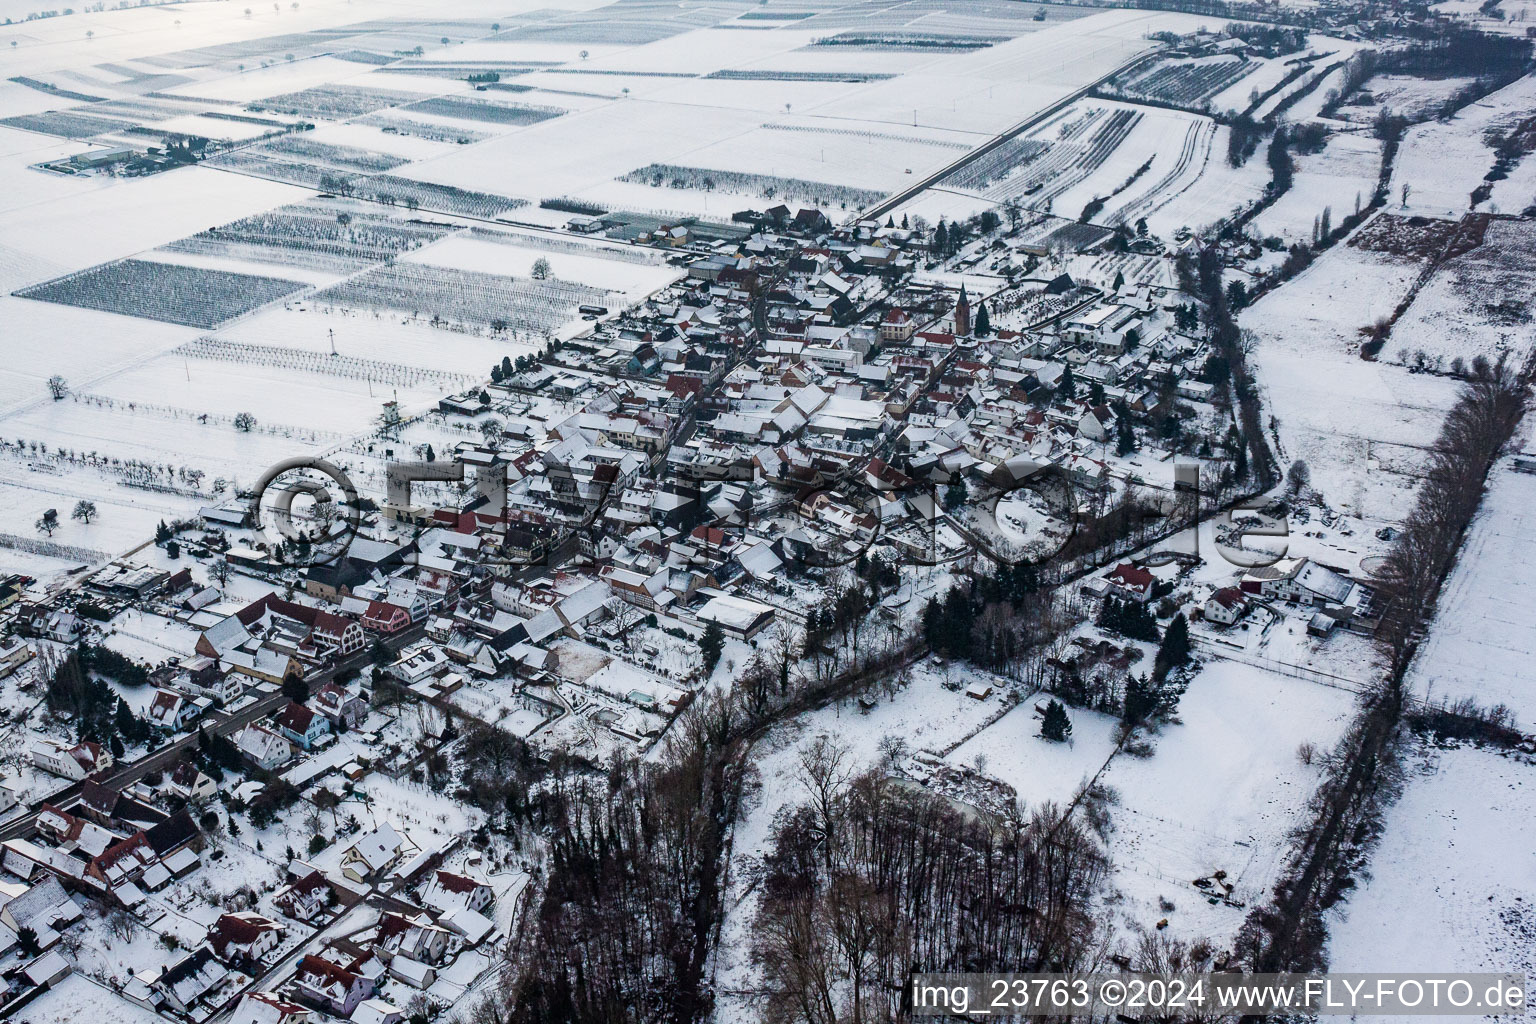 Aerial view of Wintry snowy Village - view on the edge of agricultural fields and farmland in Winden in the state Rhineland-Palatinate, Germany